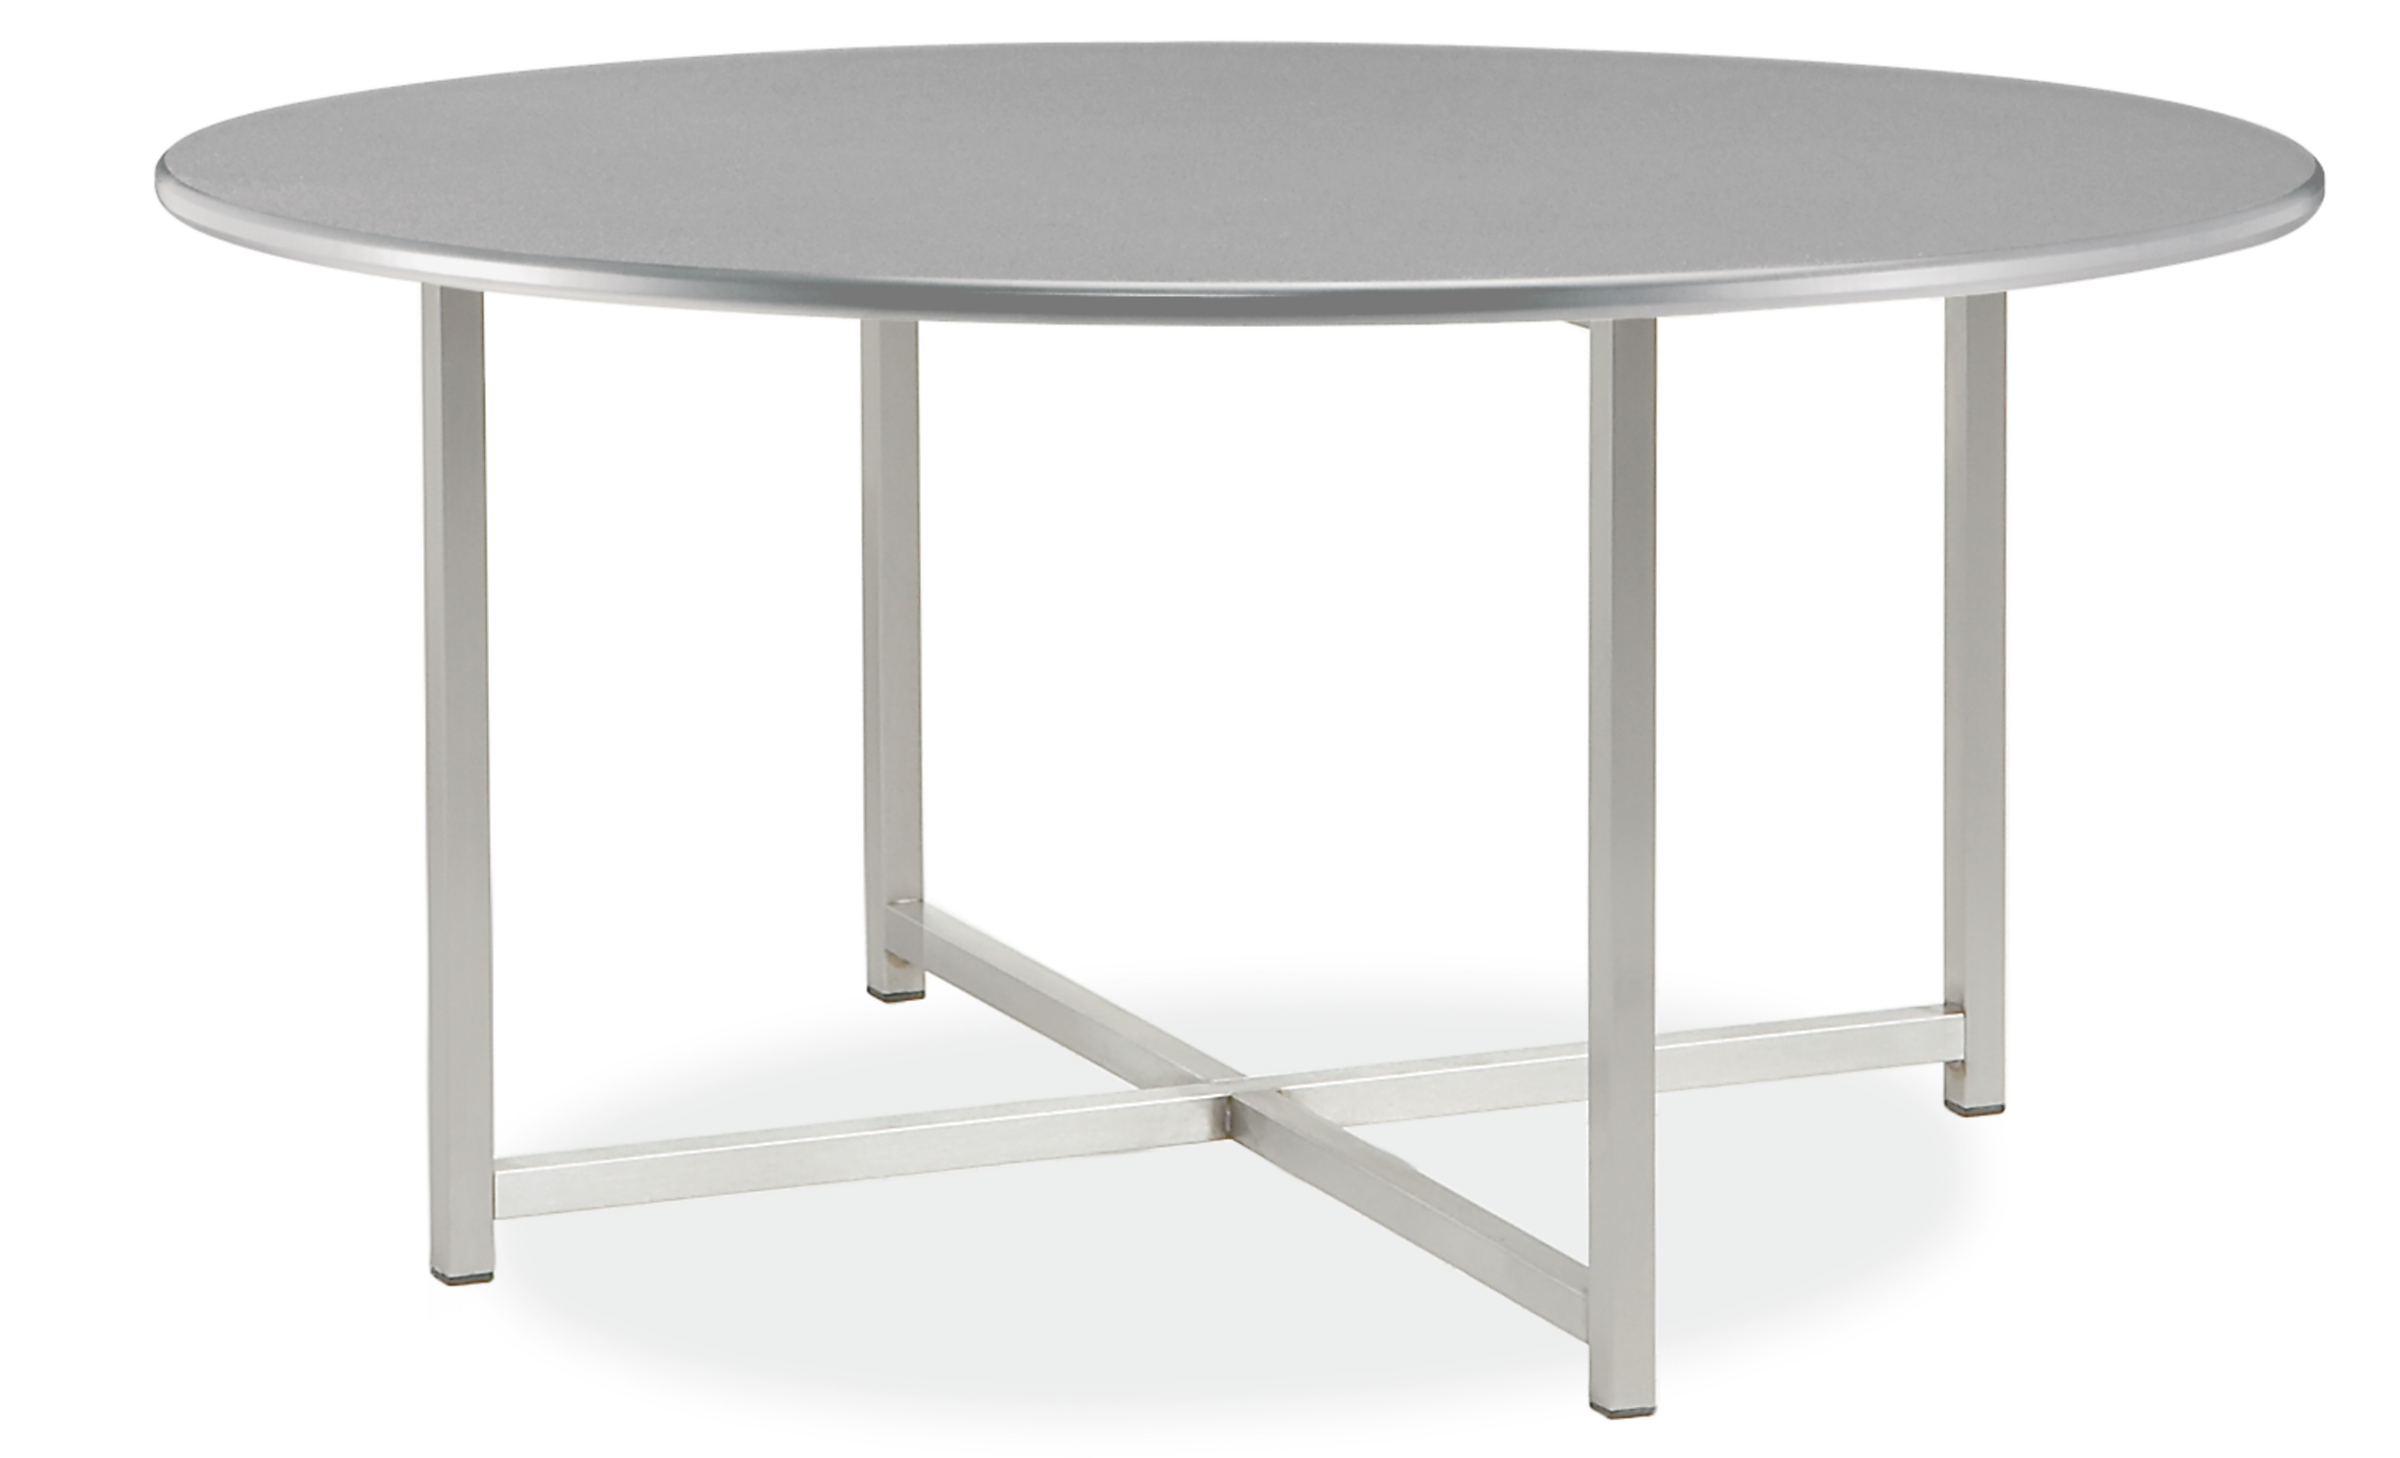 Classic 27 diam 16h Round Outdoor Coffee Table in SS w/Light Grey HDPE Top